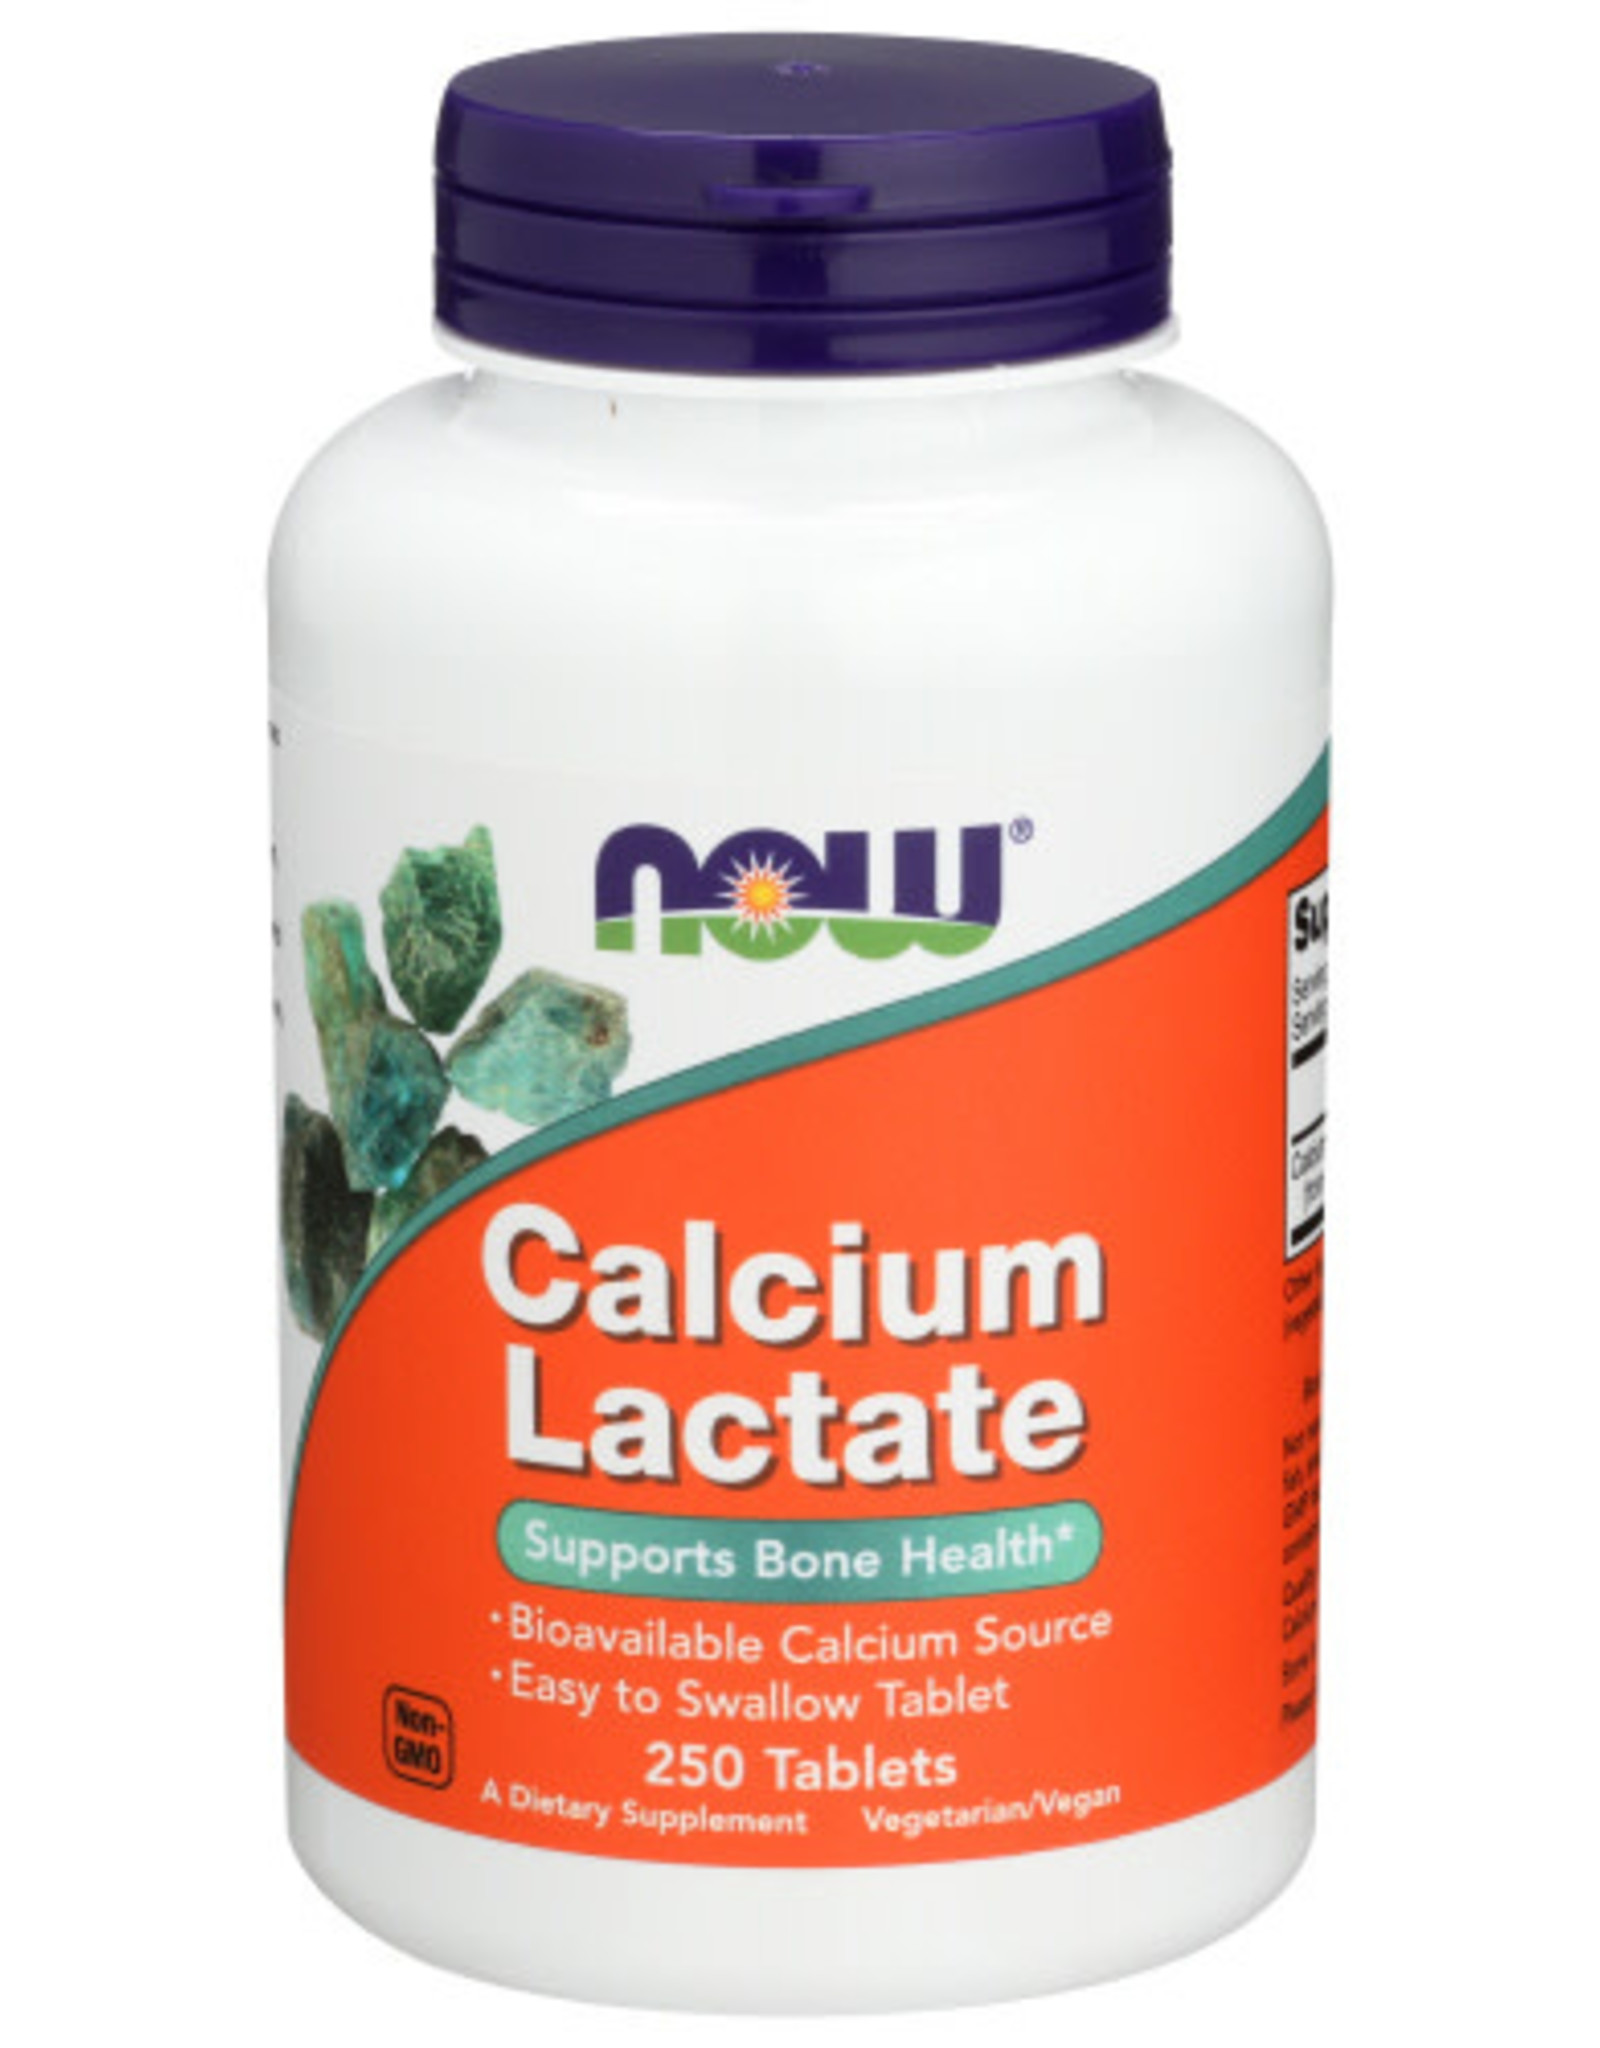 NOW FOODS NOW FOODS CALCIUM LACTATE DIETARY SUPPLEMENT, 250 TABLETS